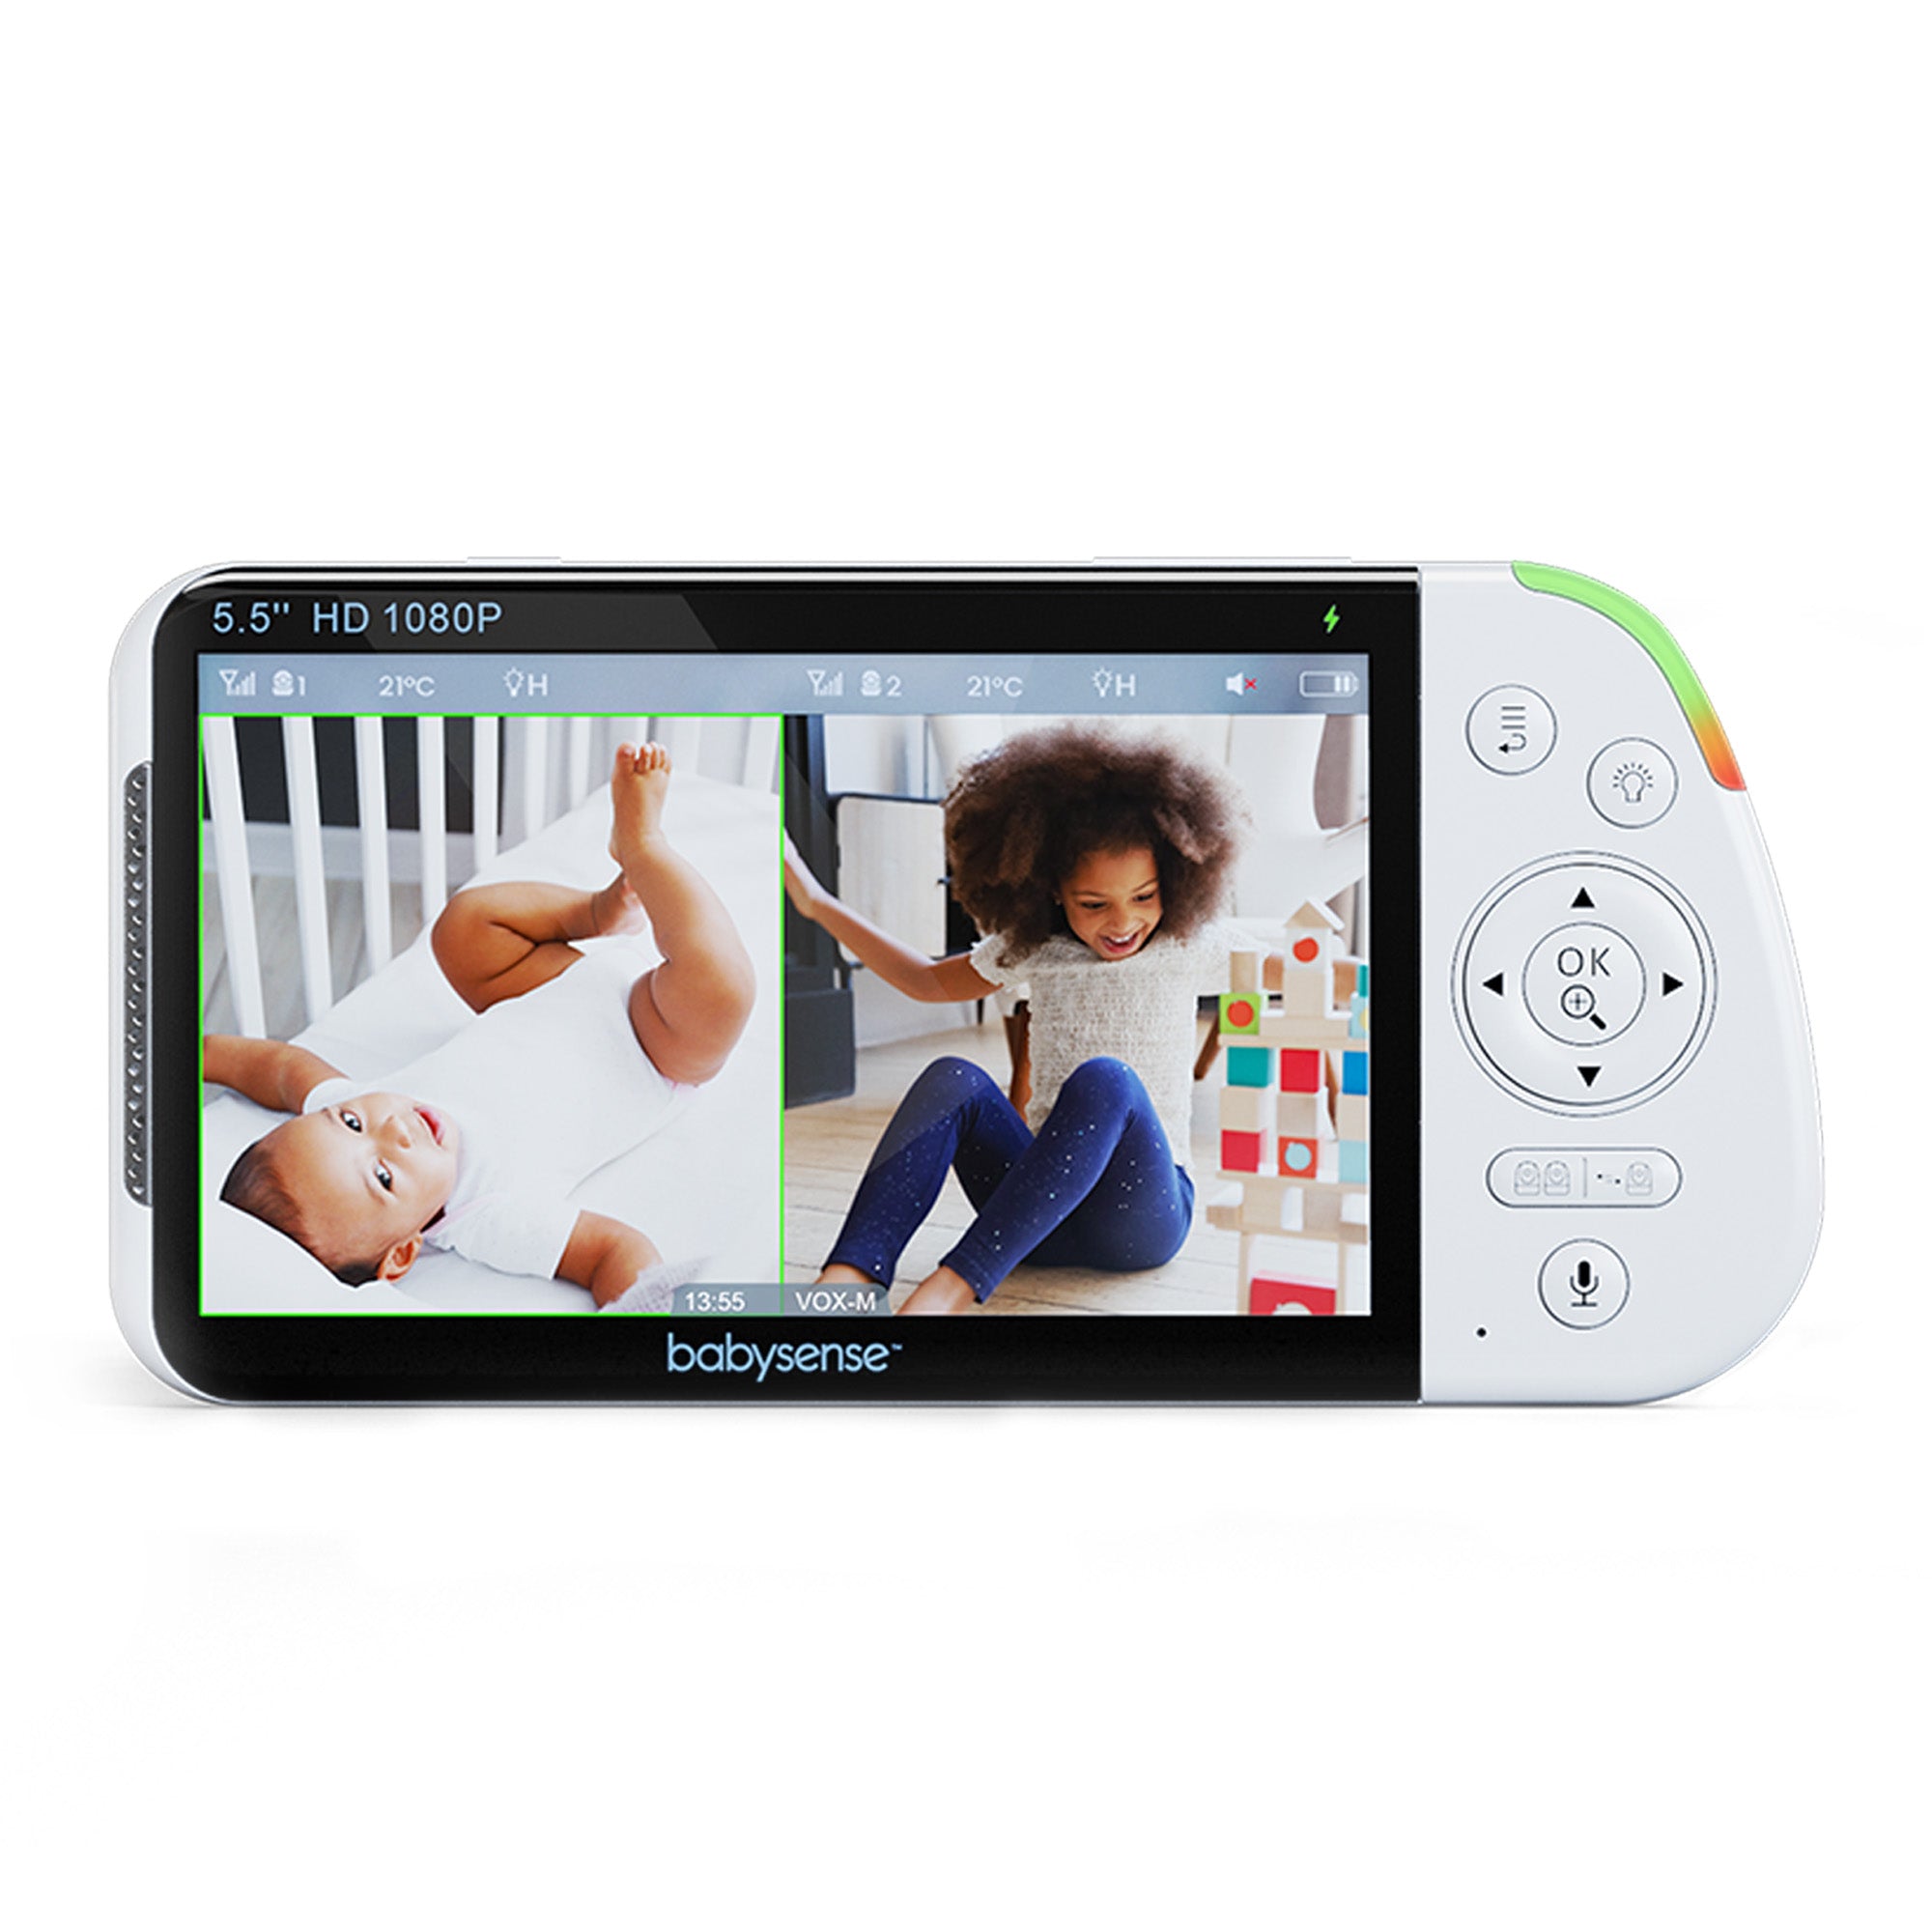 Parent Unit for 5.5" Split-Screen Video Baby Monitor MaxView